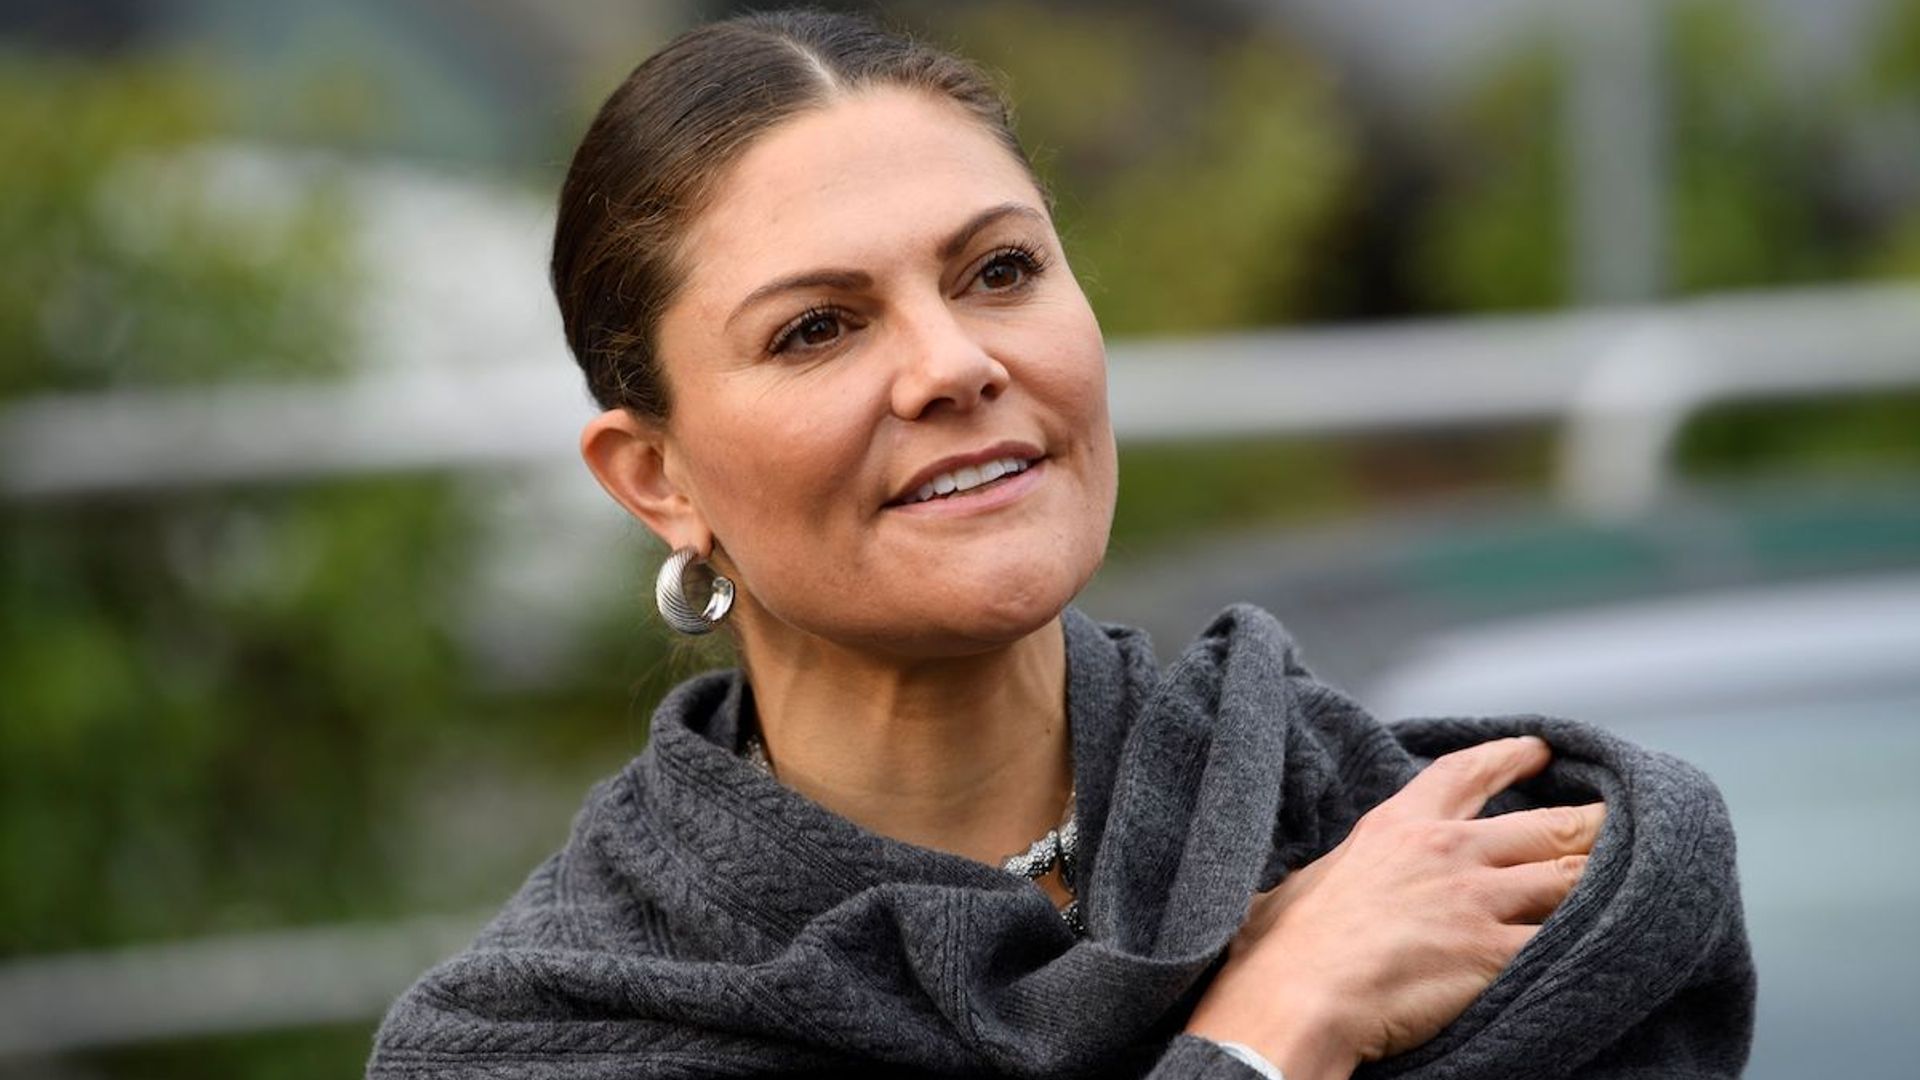 Sweden's Crown Princess Victoria just wore a cashmere co-ord we weren't expecting